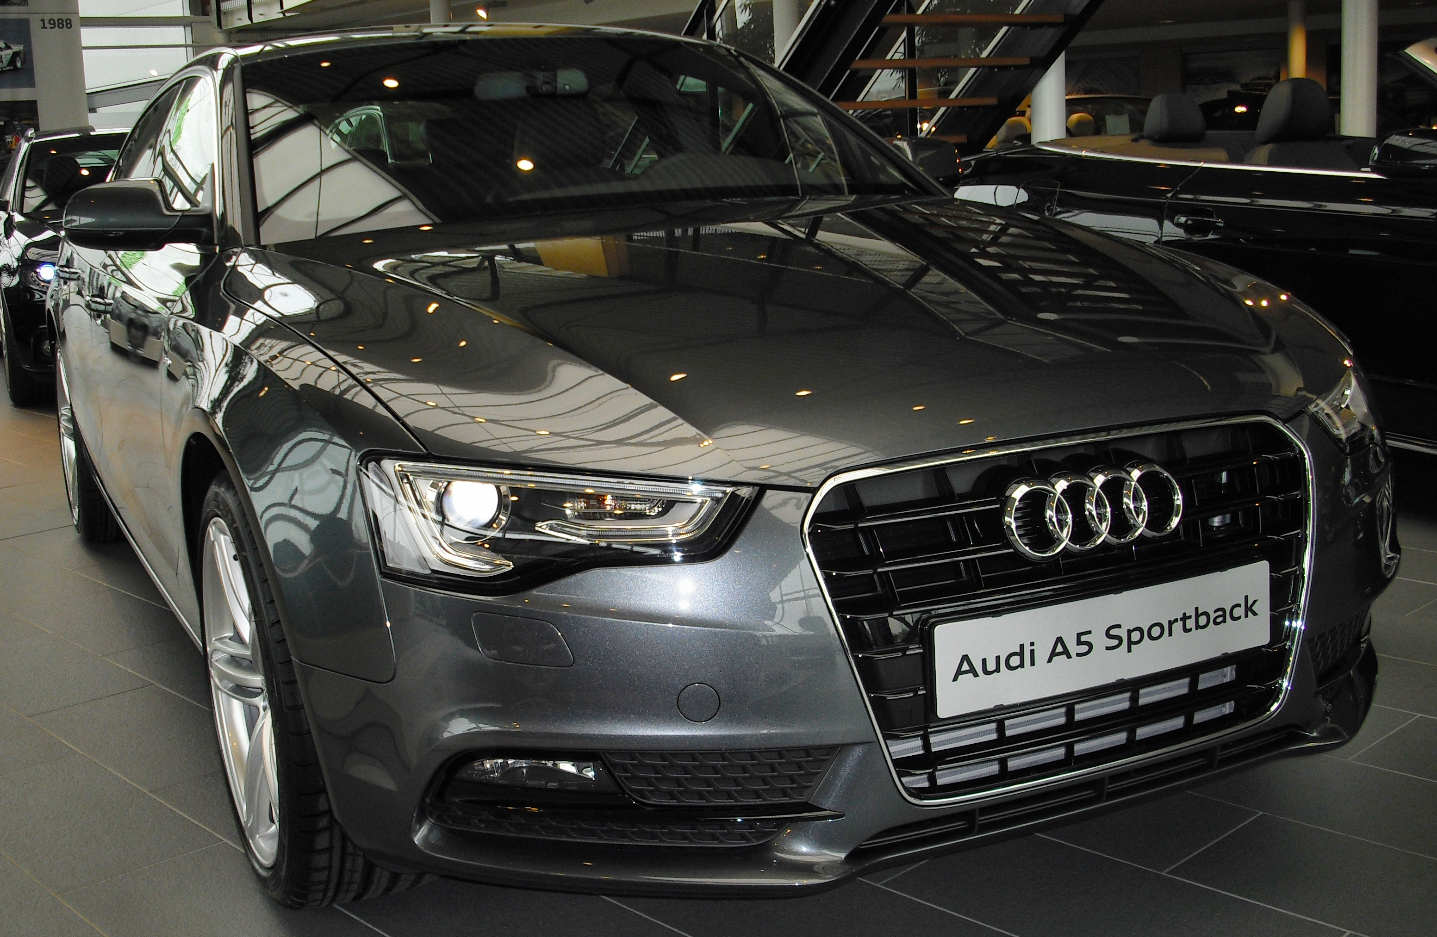 A5 Sportback neues Modell vorn